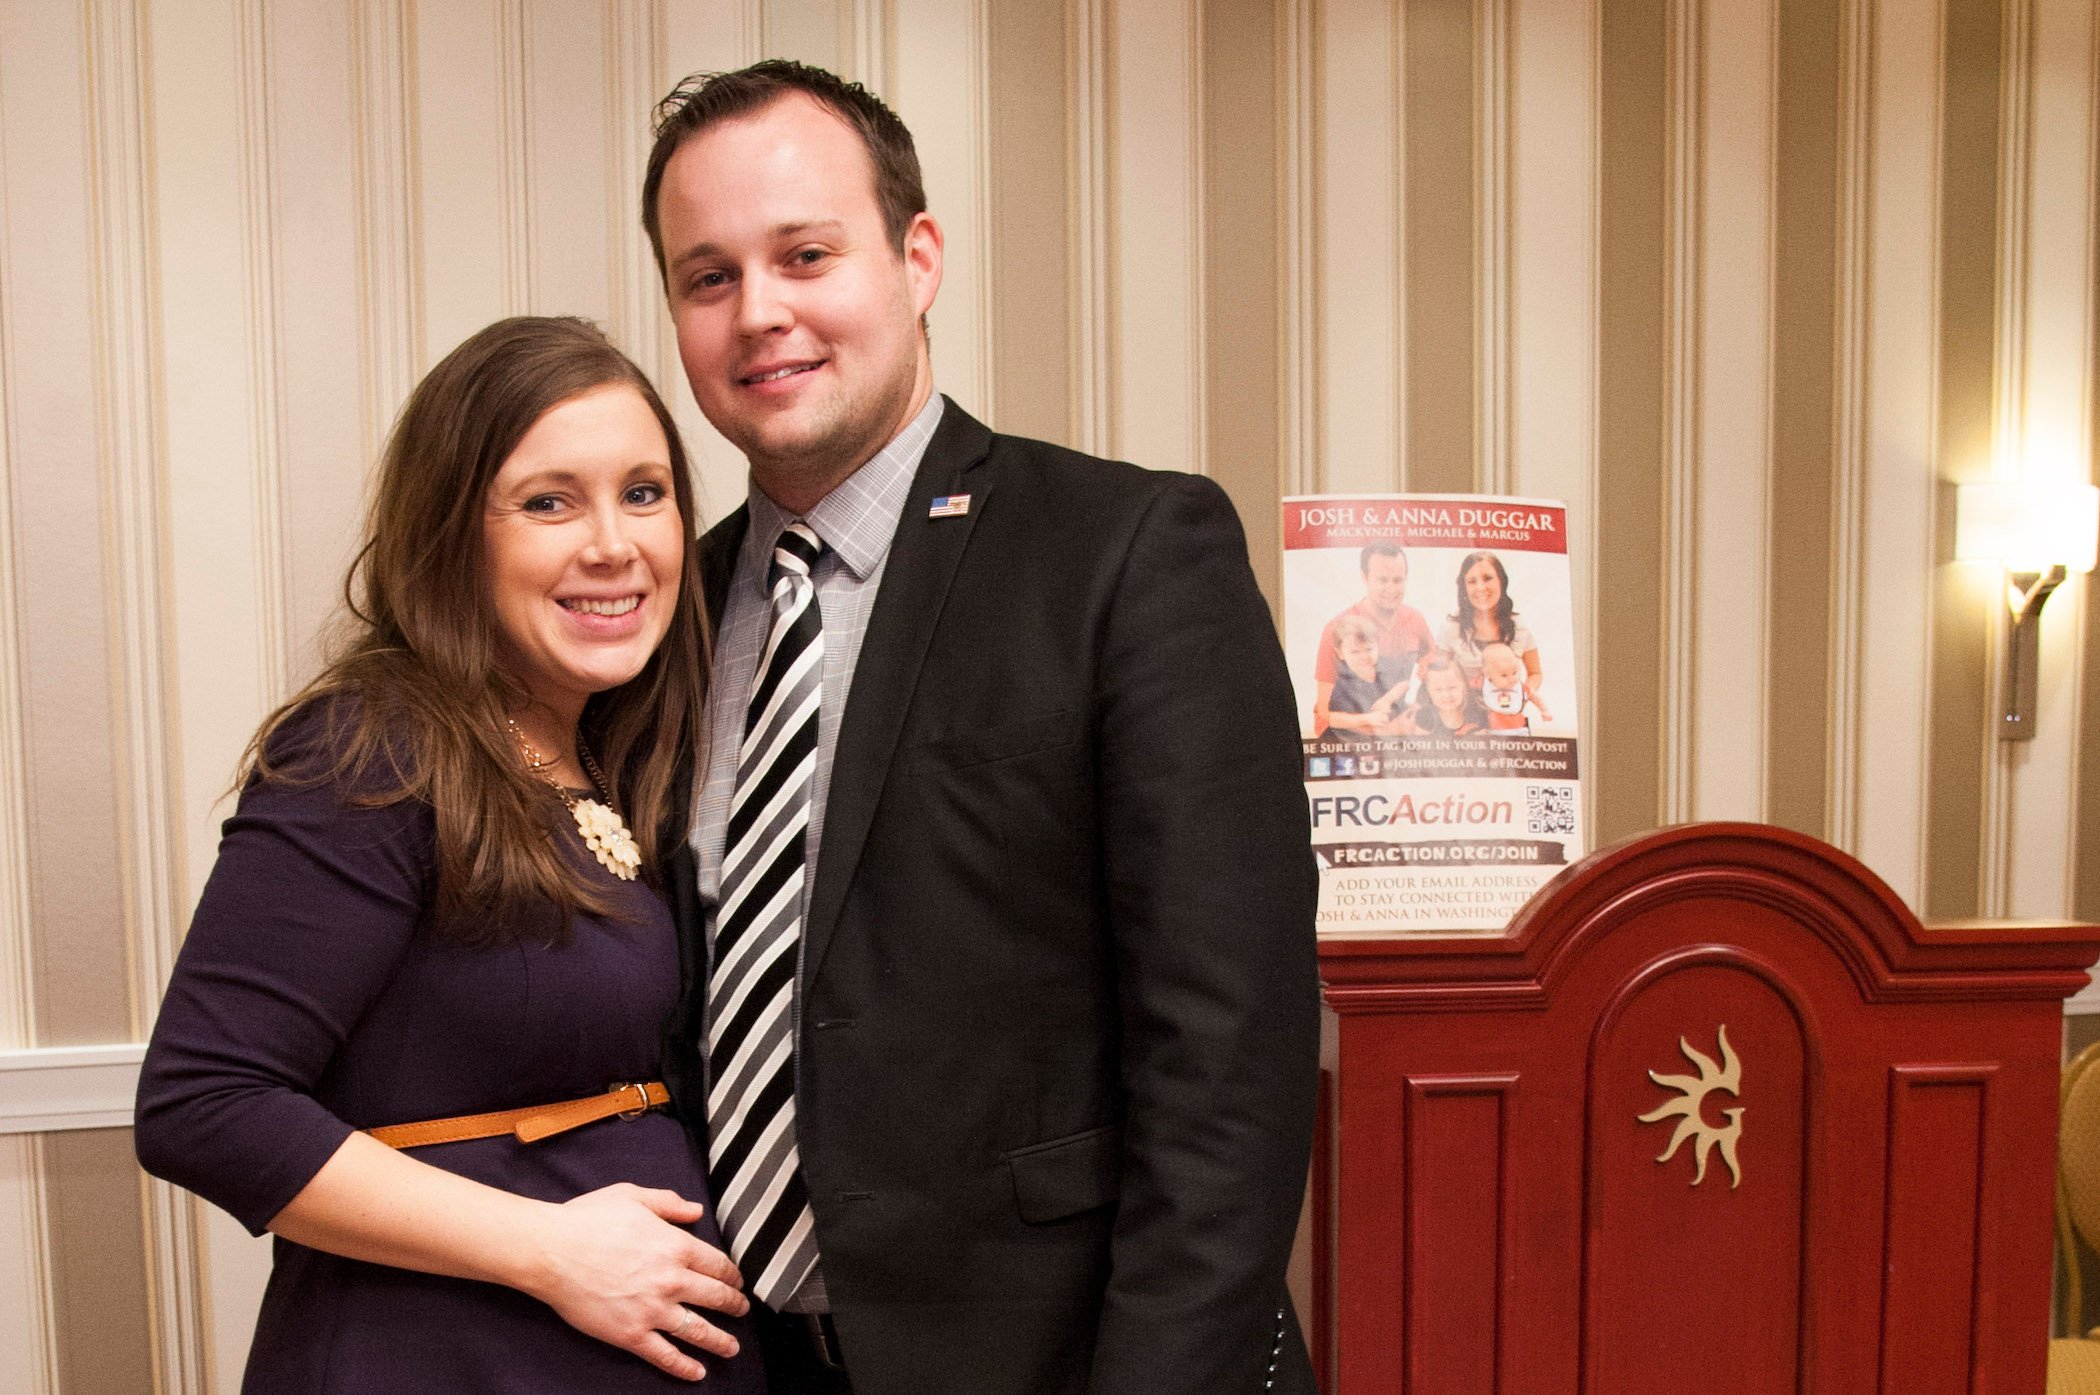 Anna Duggar and Josh Duggar from the Duggar family standing next to each other and smiling at an event